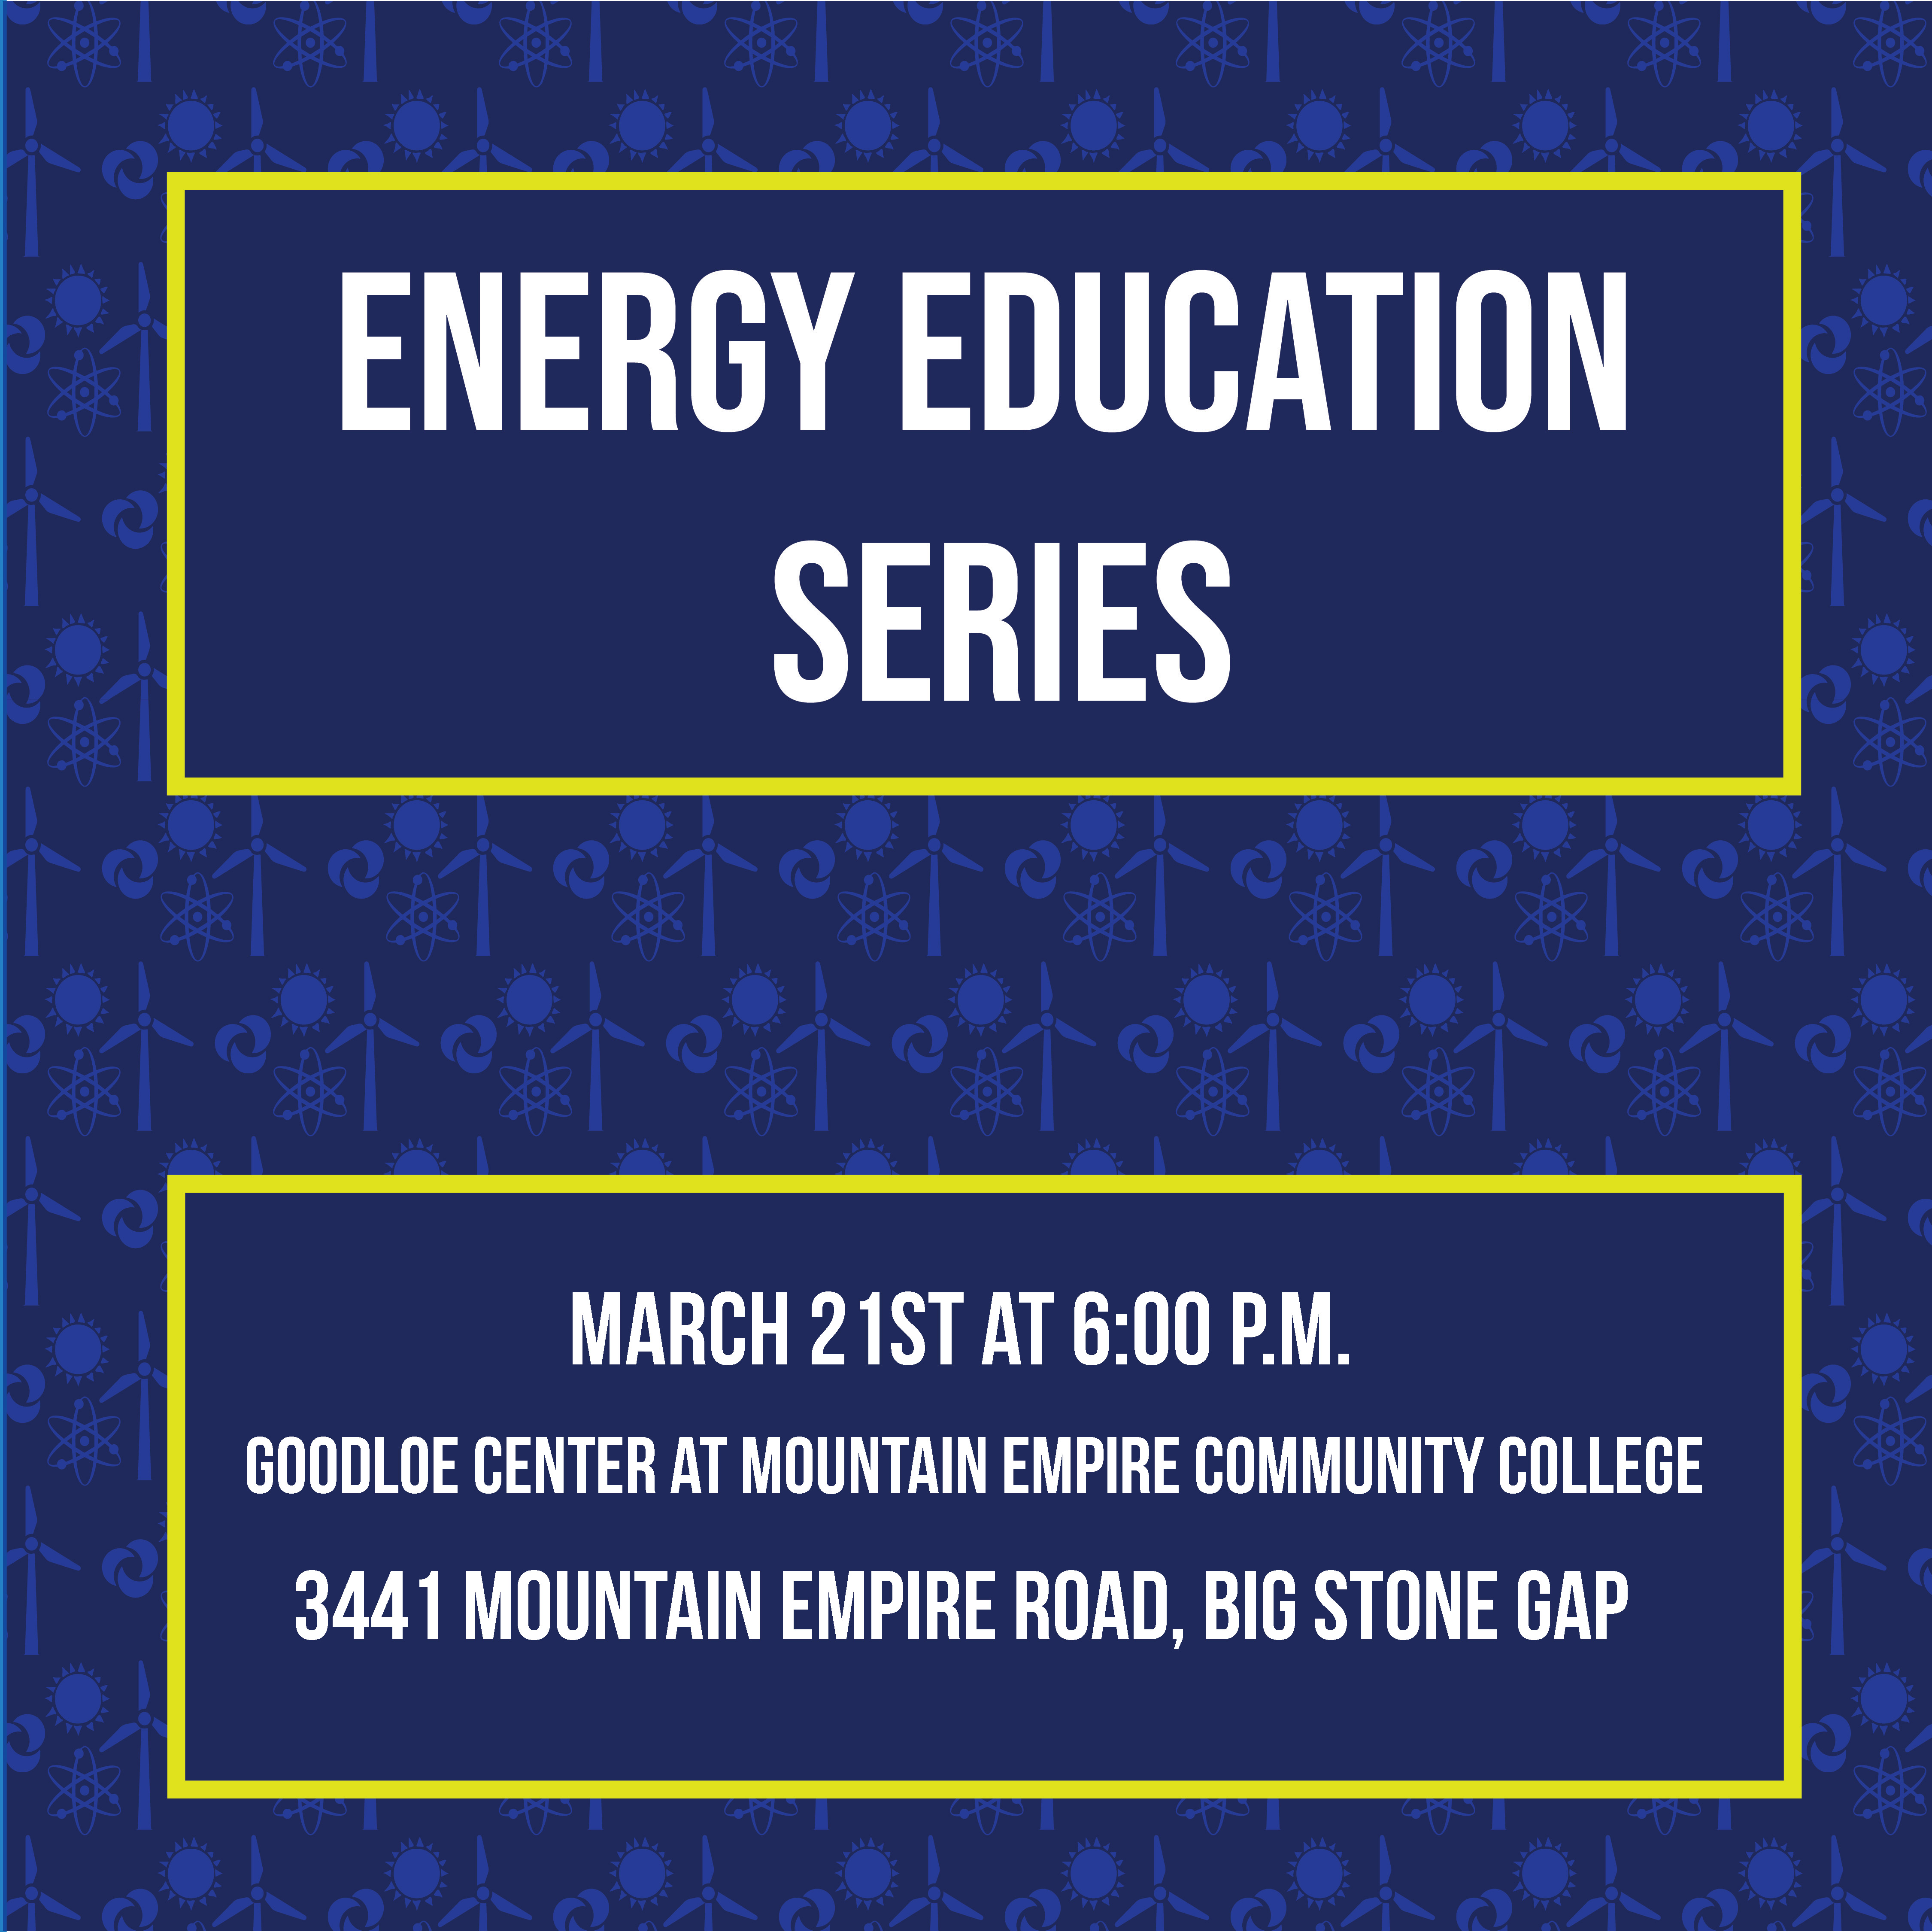 Energy Education Serires Date of March 21 at 6PM